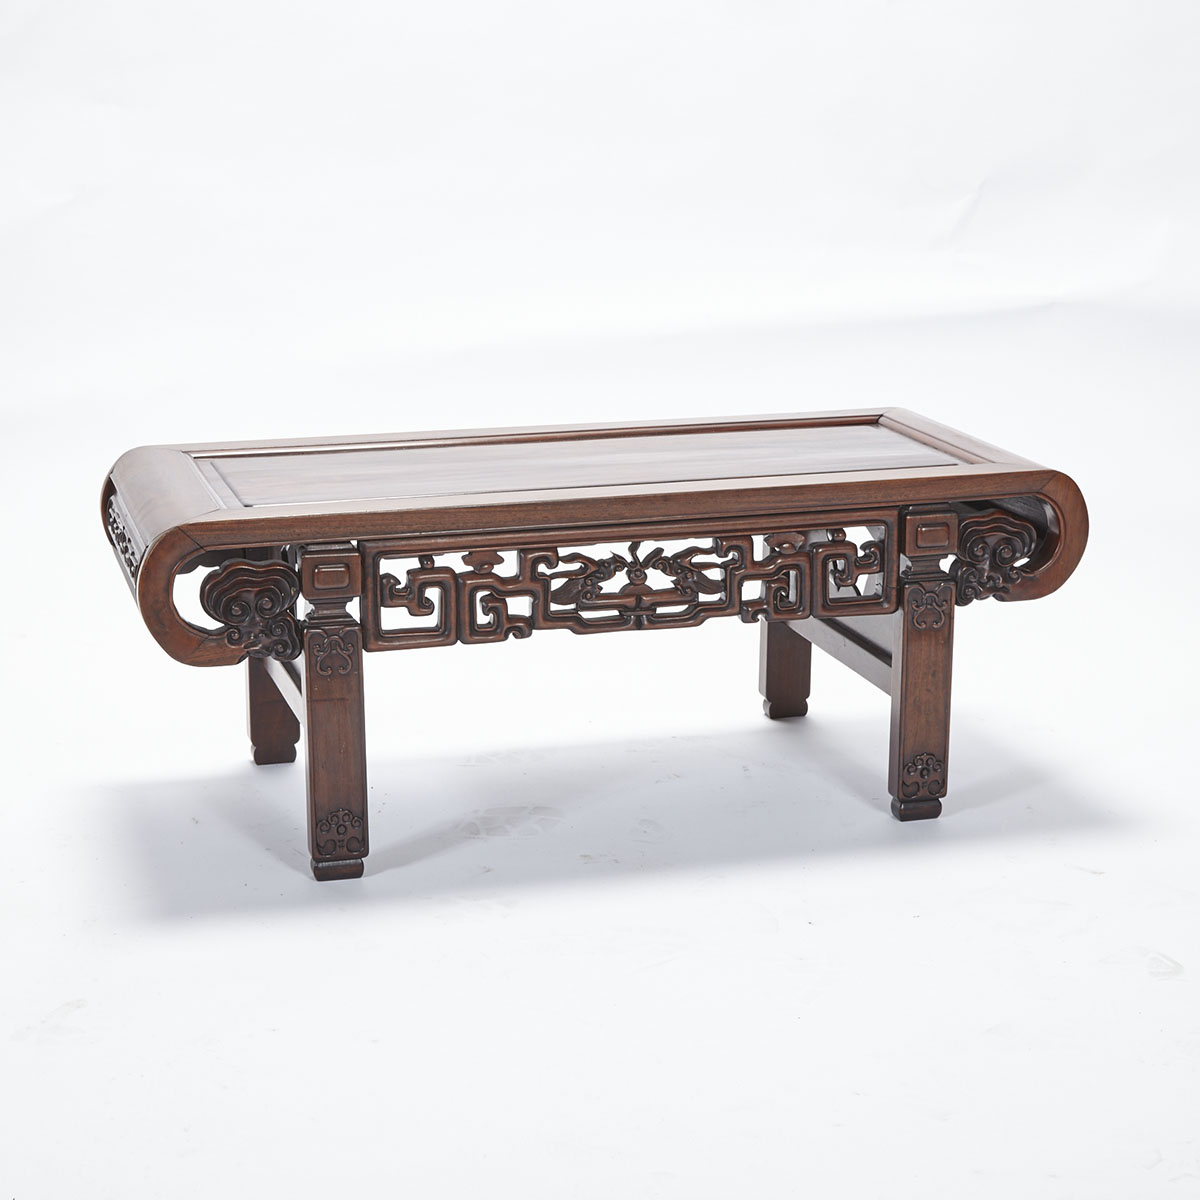 A Huali Low Table, Early 20th Century